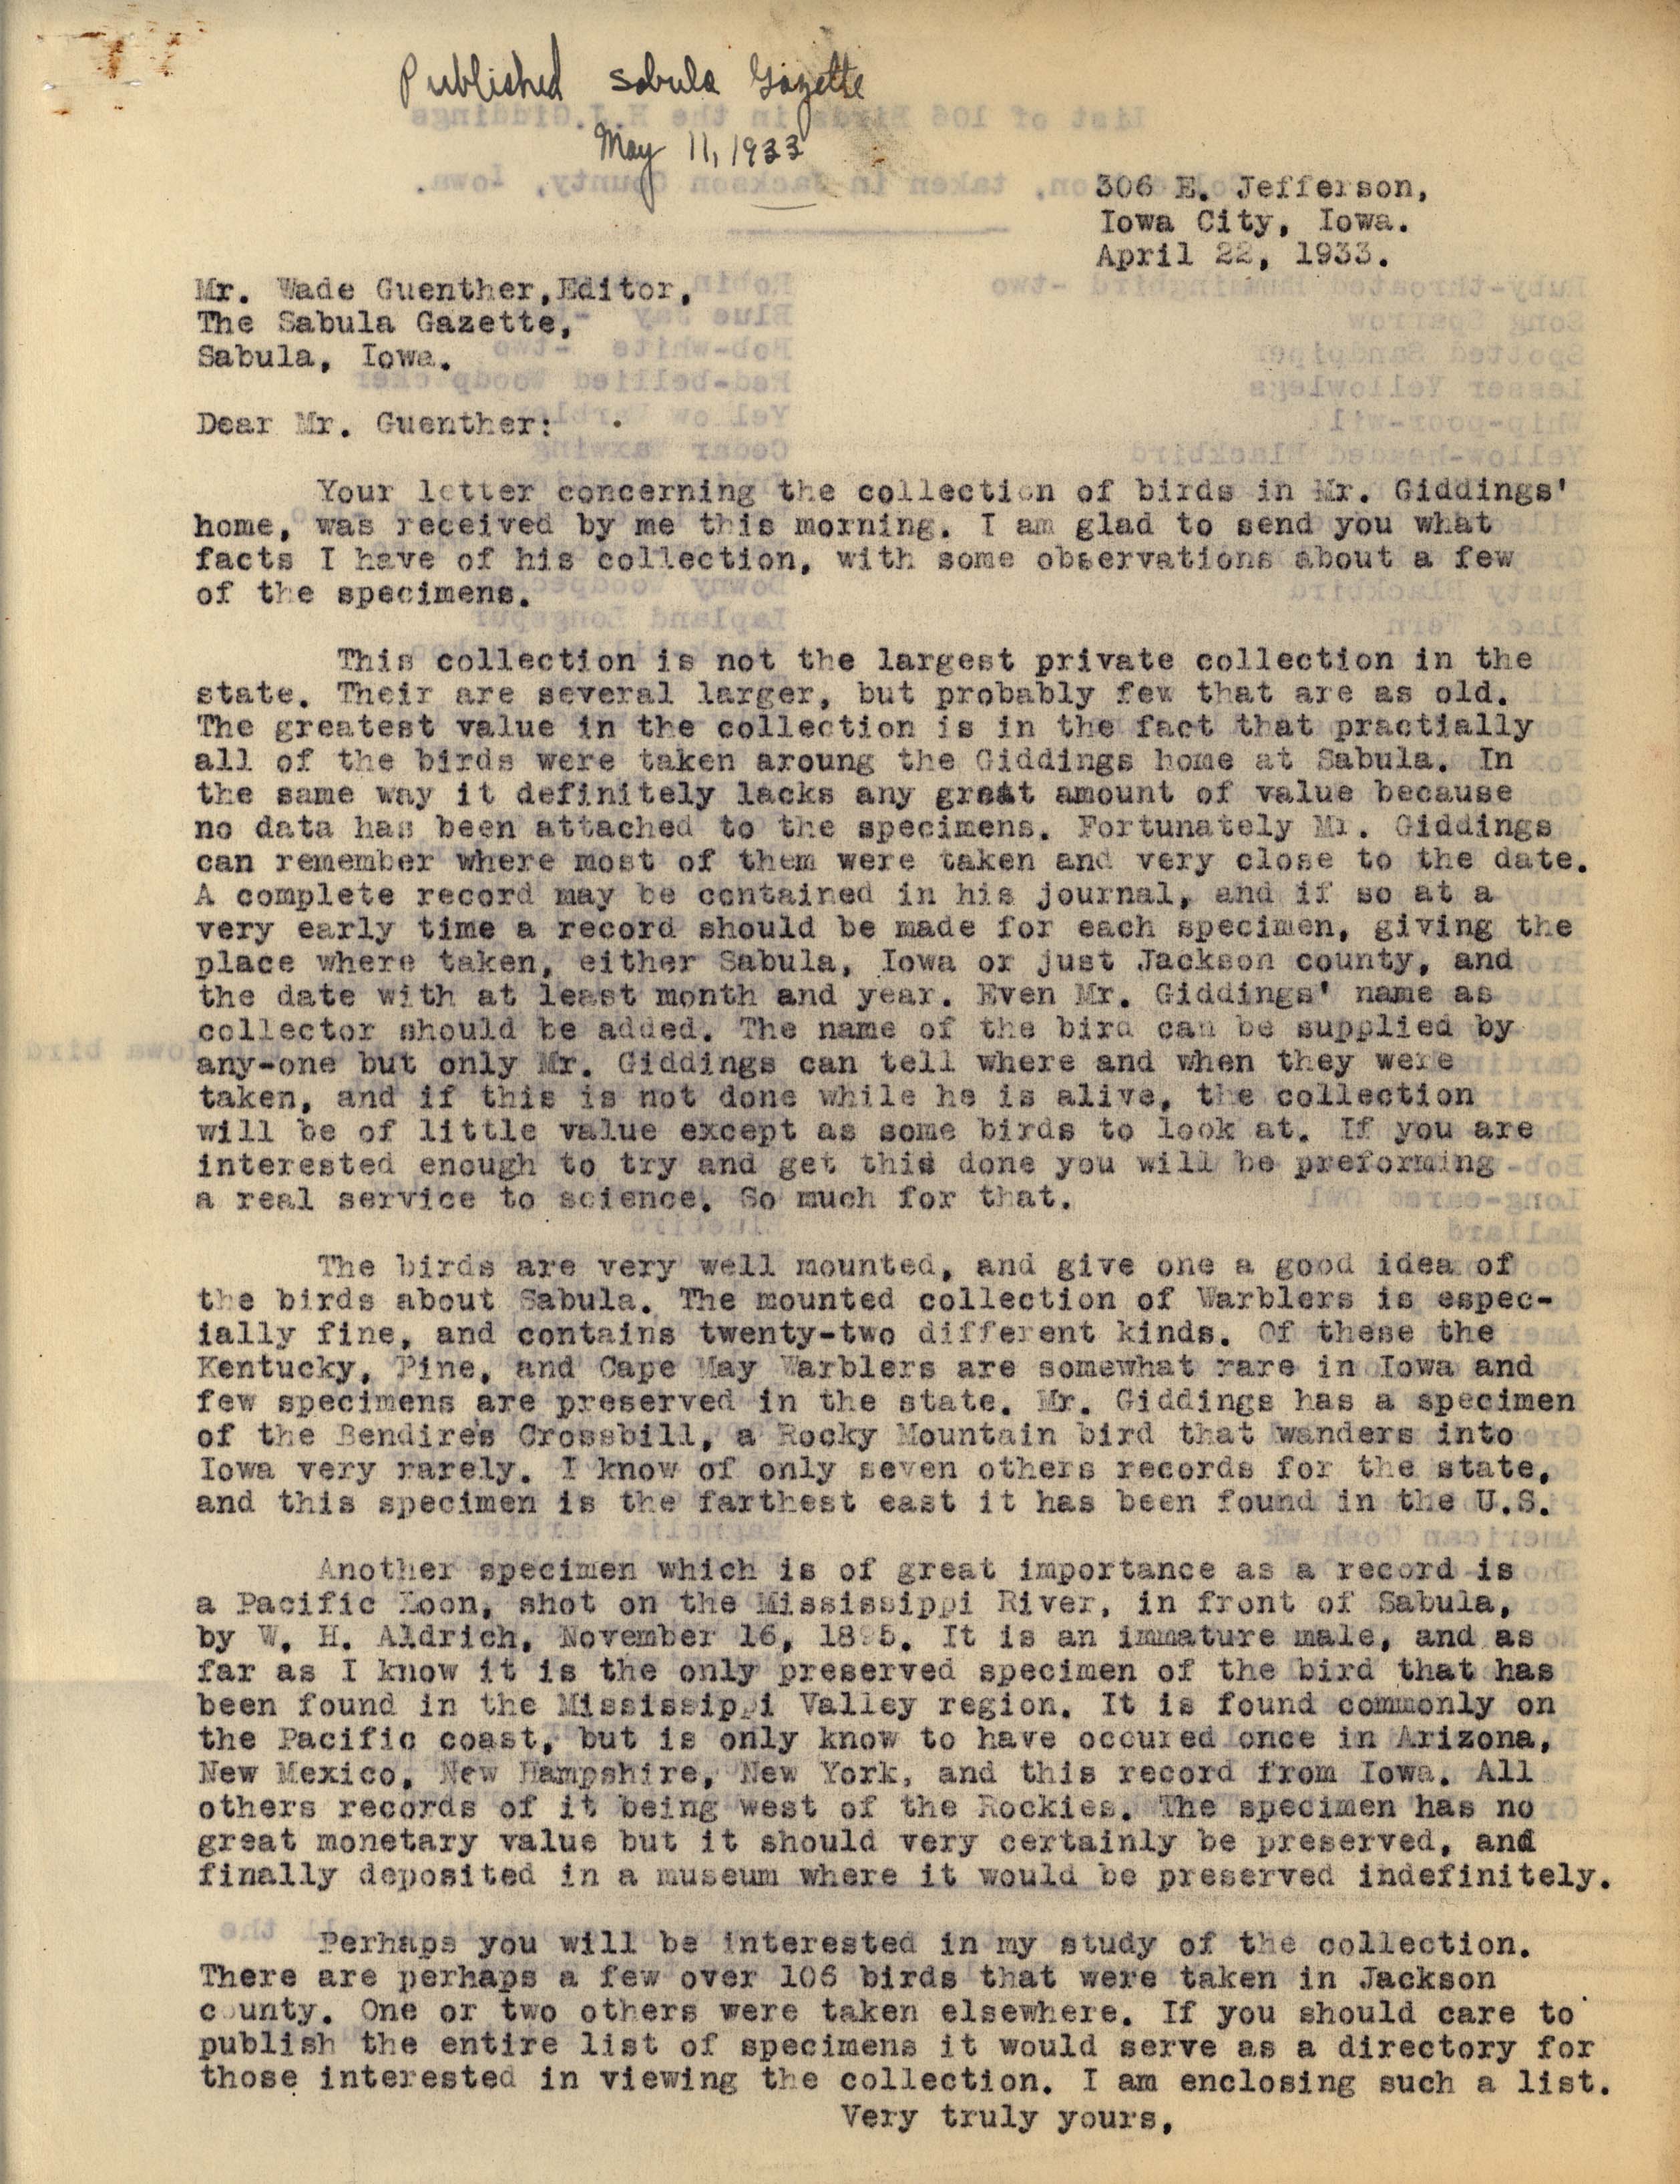 Philip DuMont letter to Wade Guenther regarding the Giddings collection, April 22, 1933